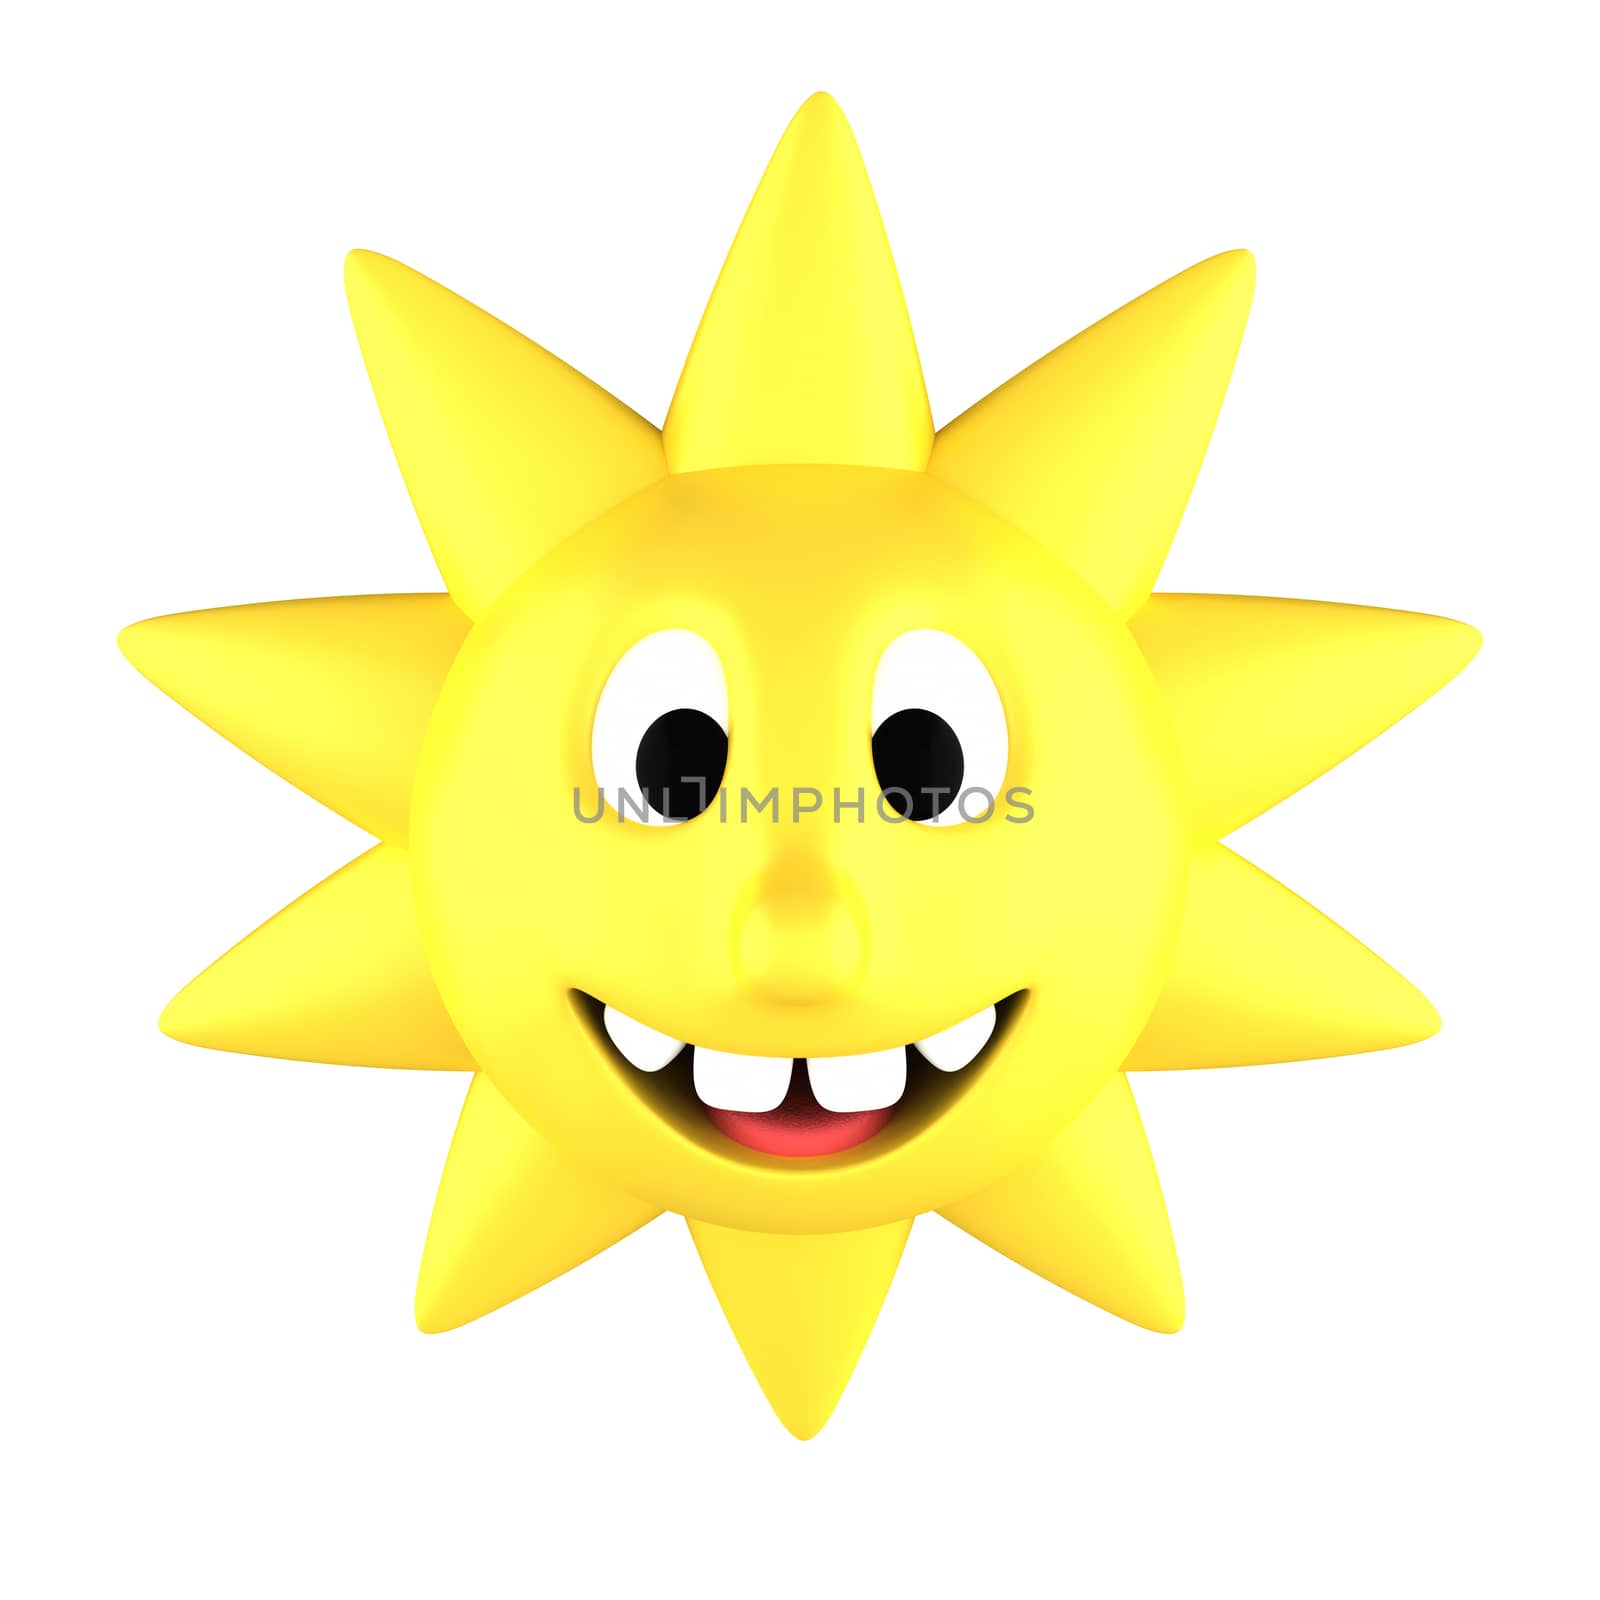 Yellow sun smiling by Harvepino